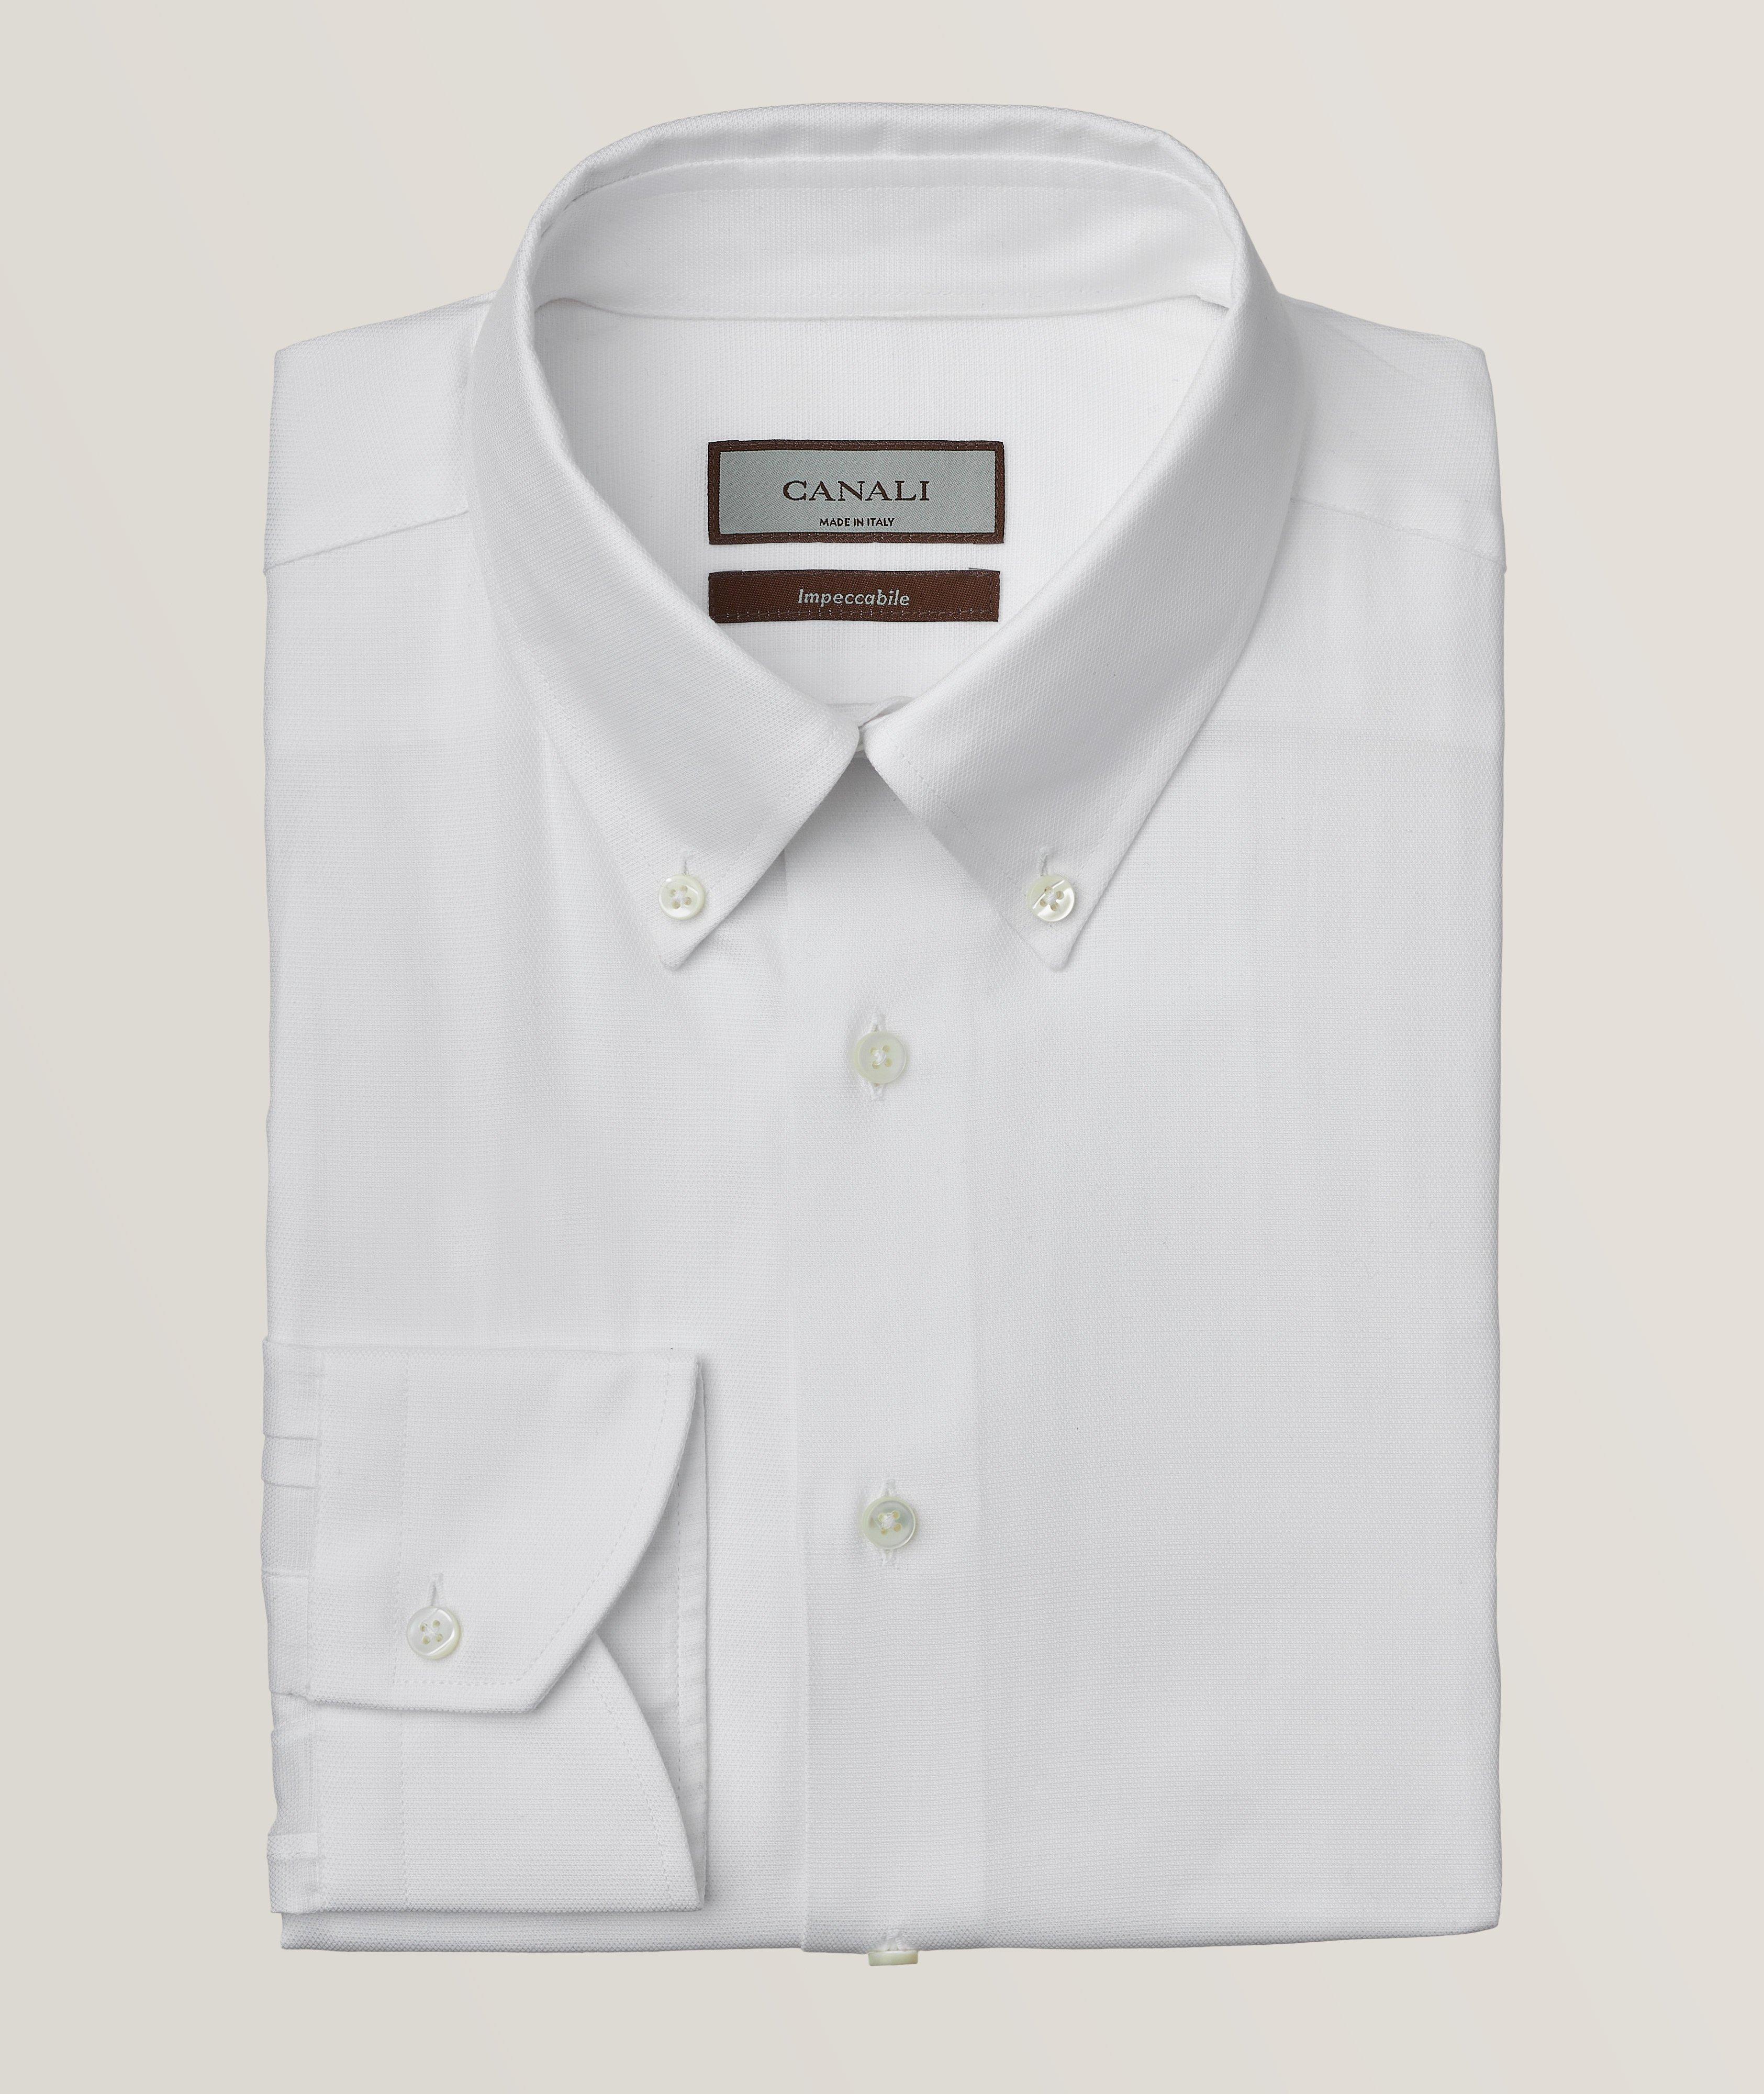 Contemporary-Fit Impeccable Button-Down Collar Dress Shirt image 0